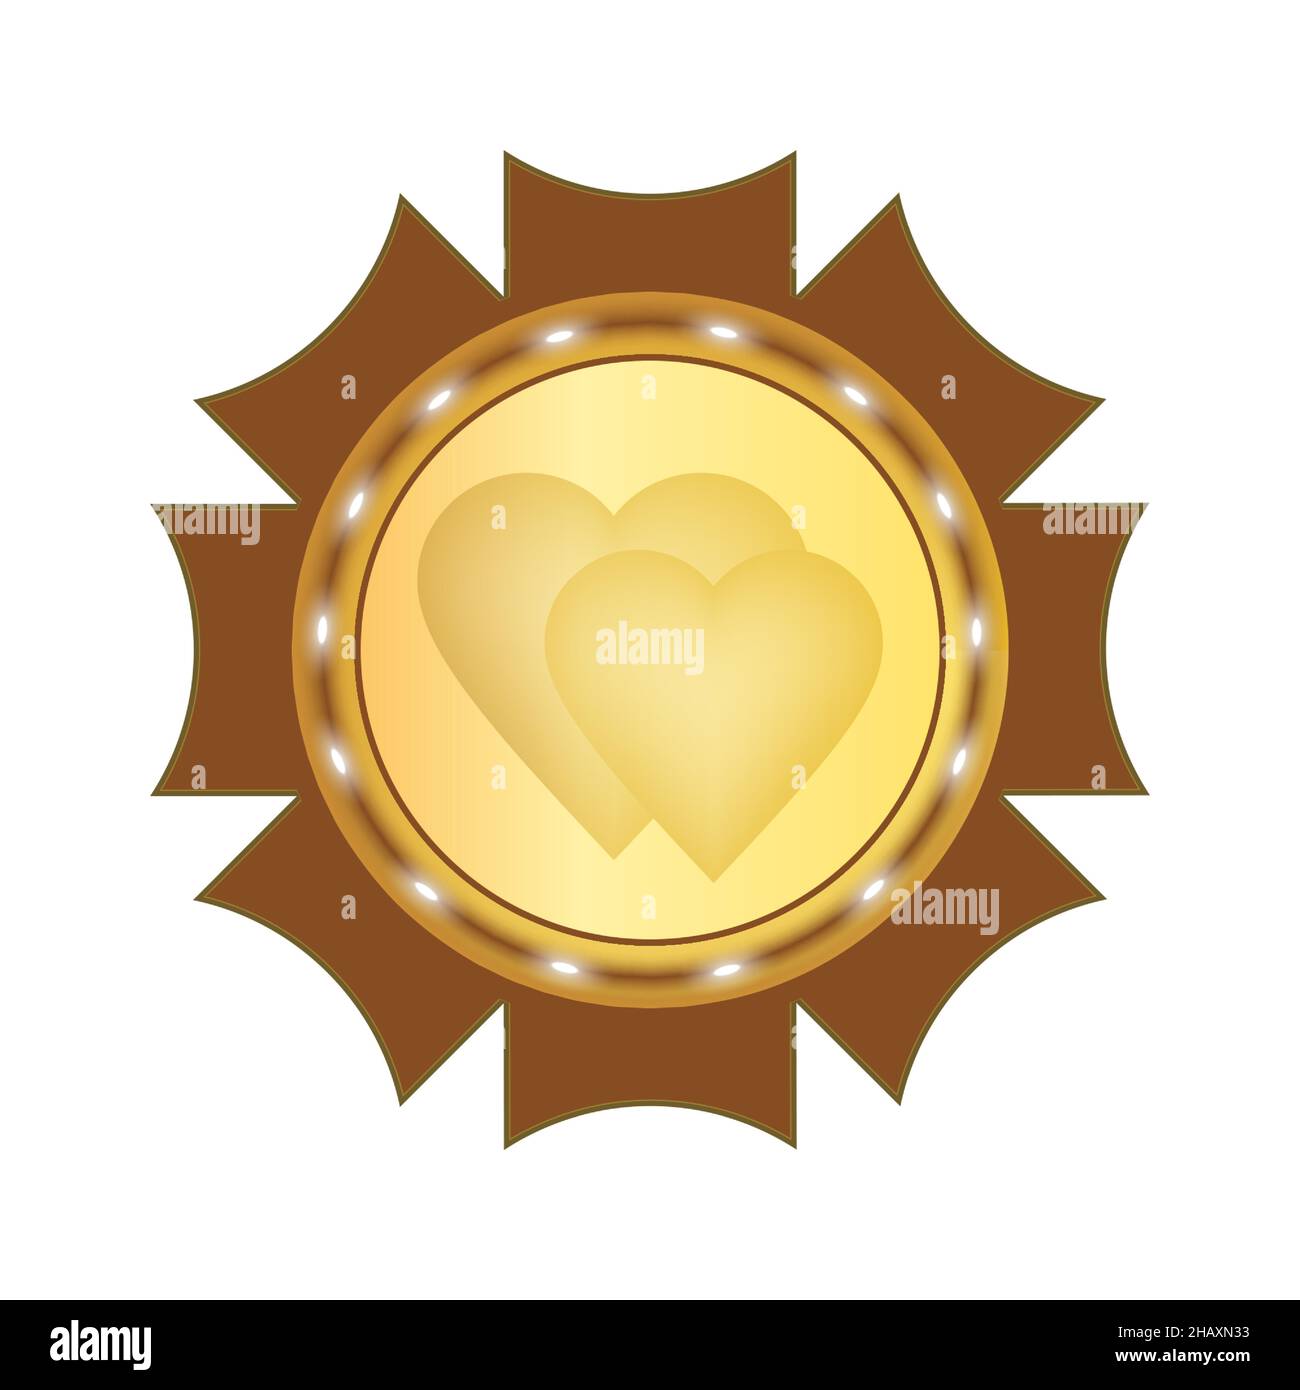 Best choice sticker isolated transparent Vector Image